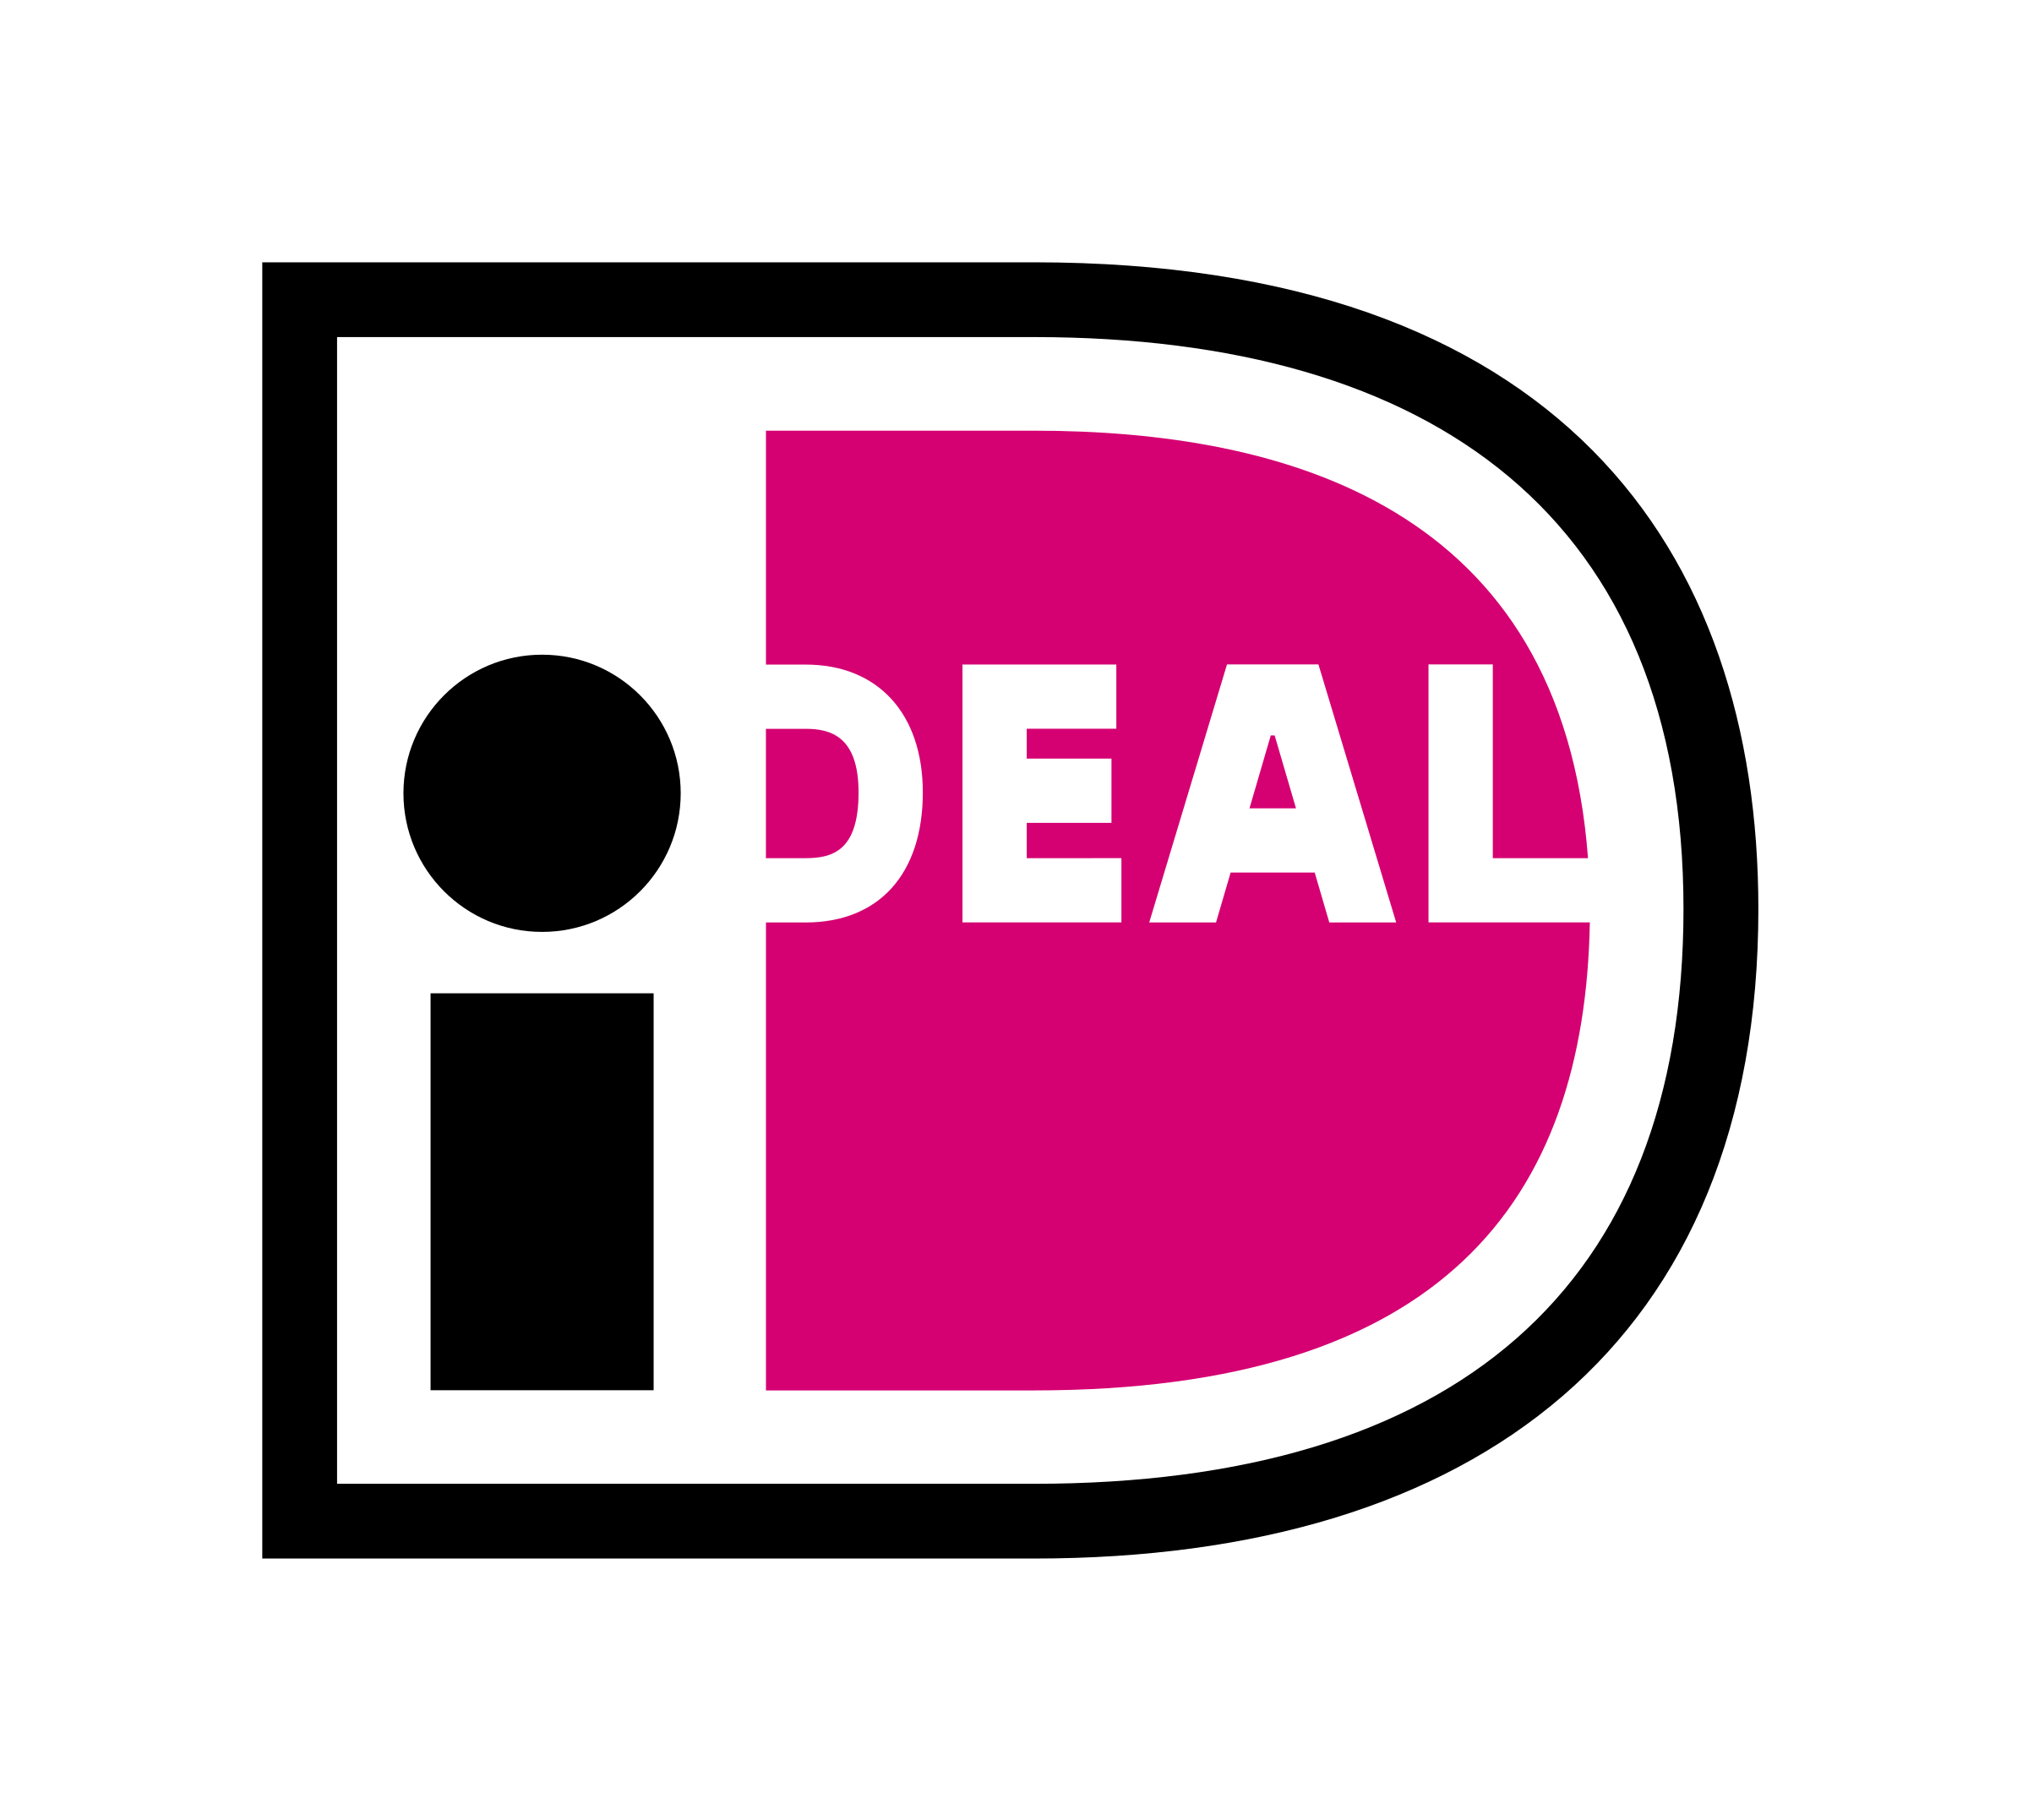 ideal_logo-1.png